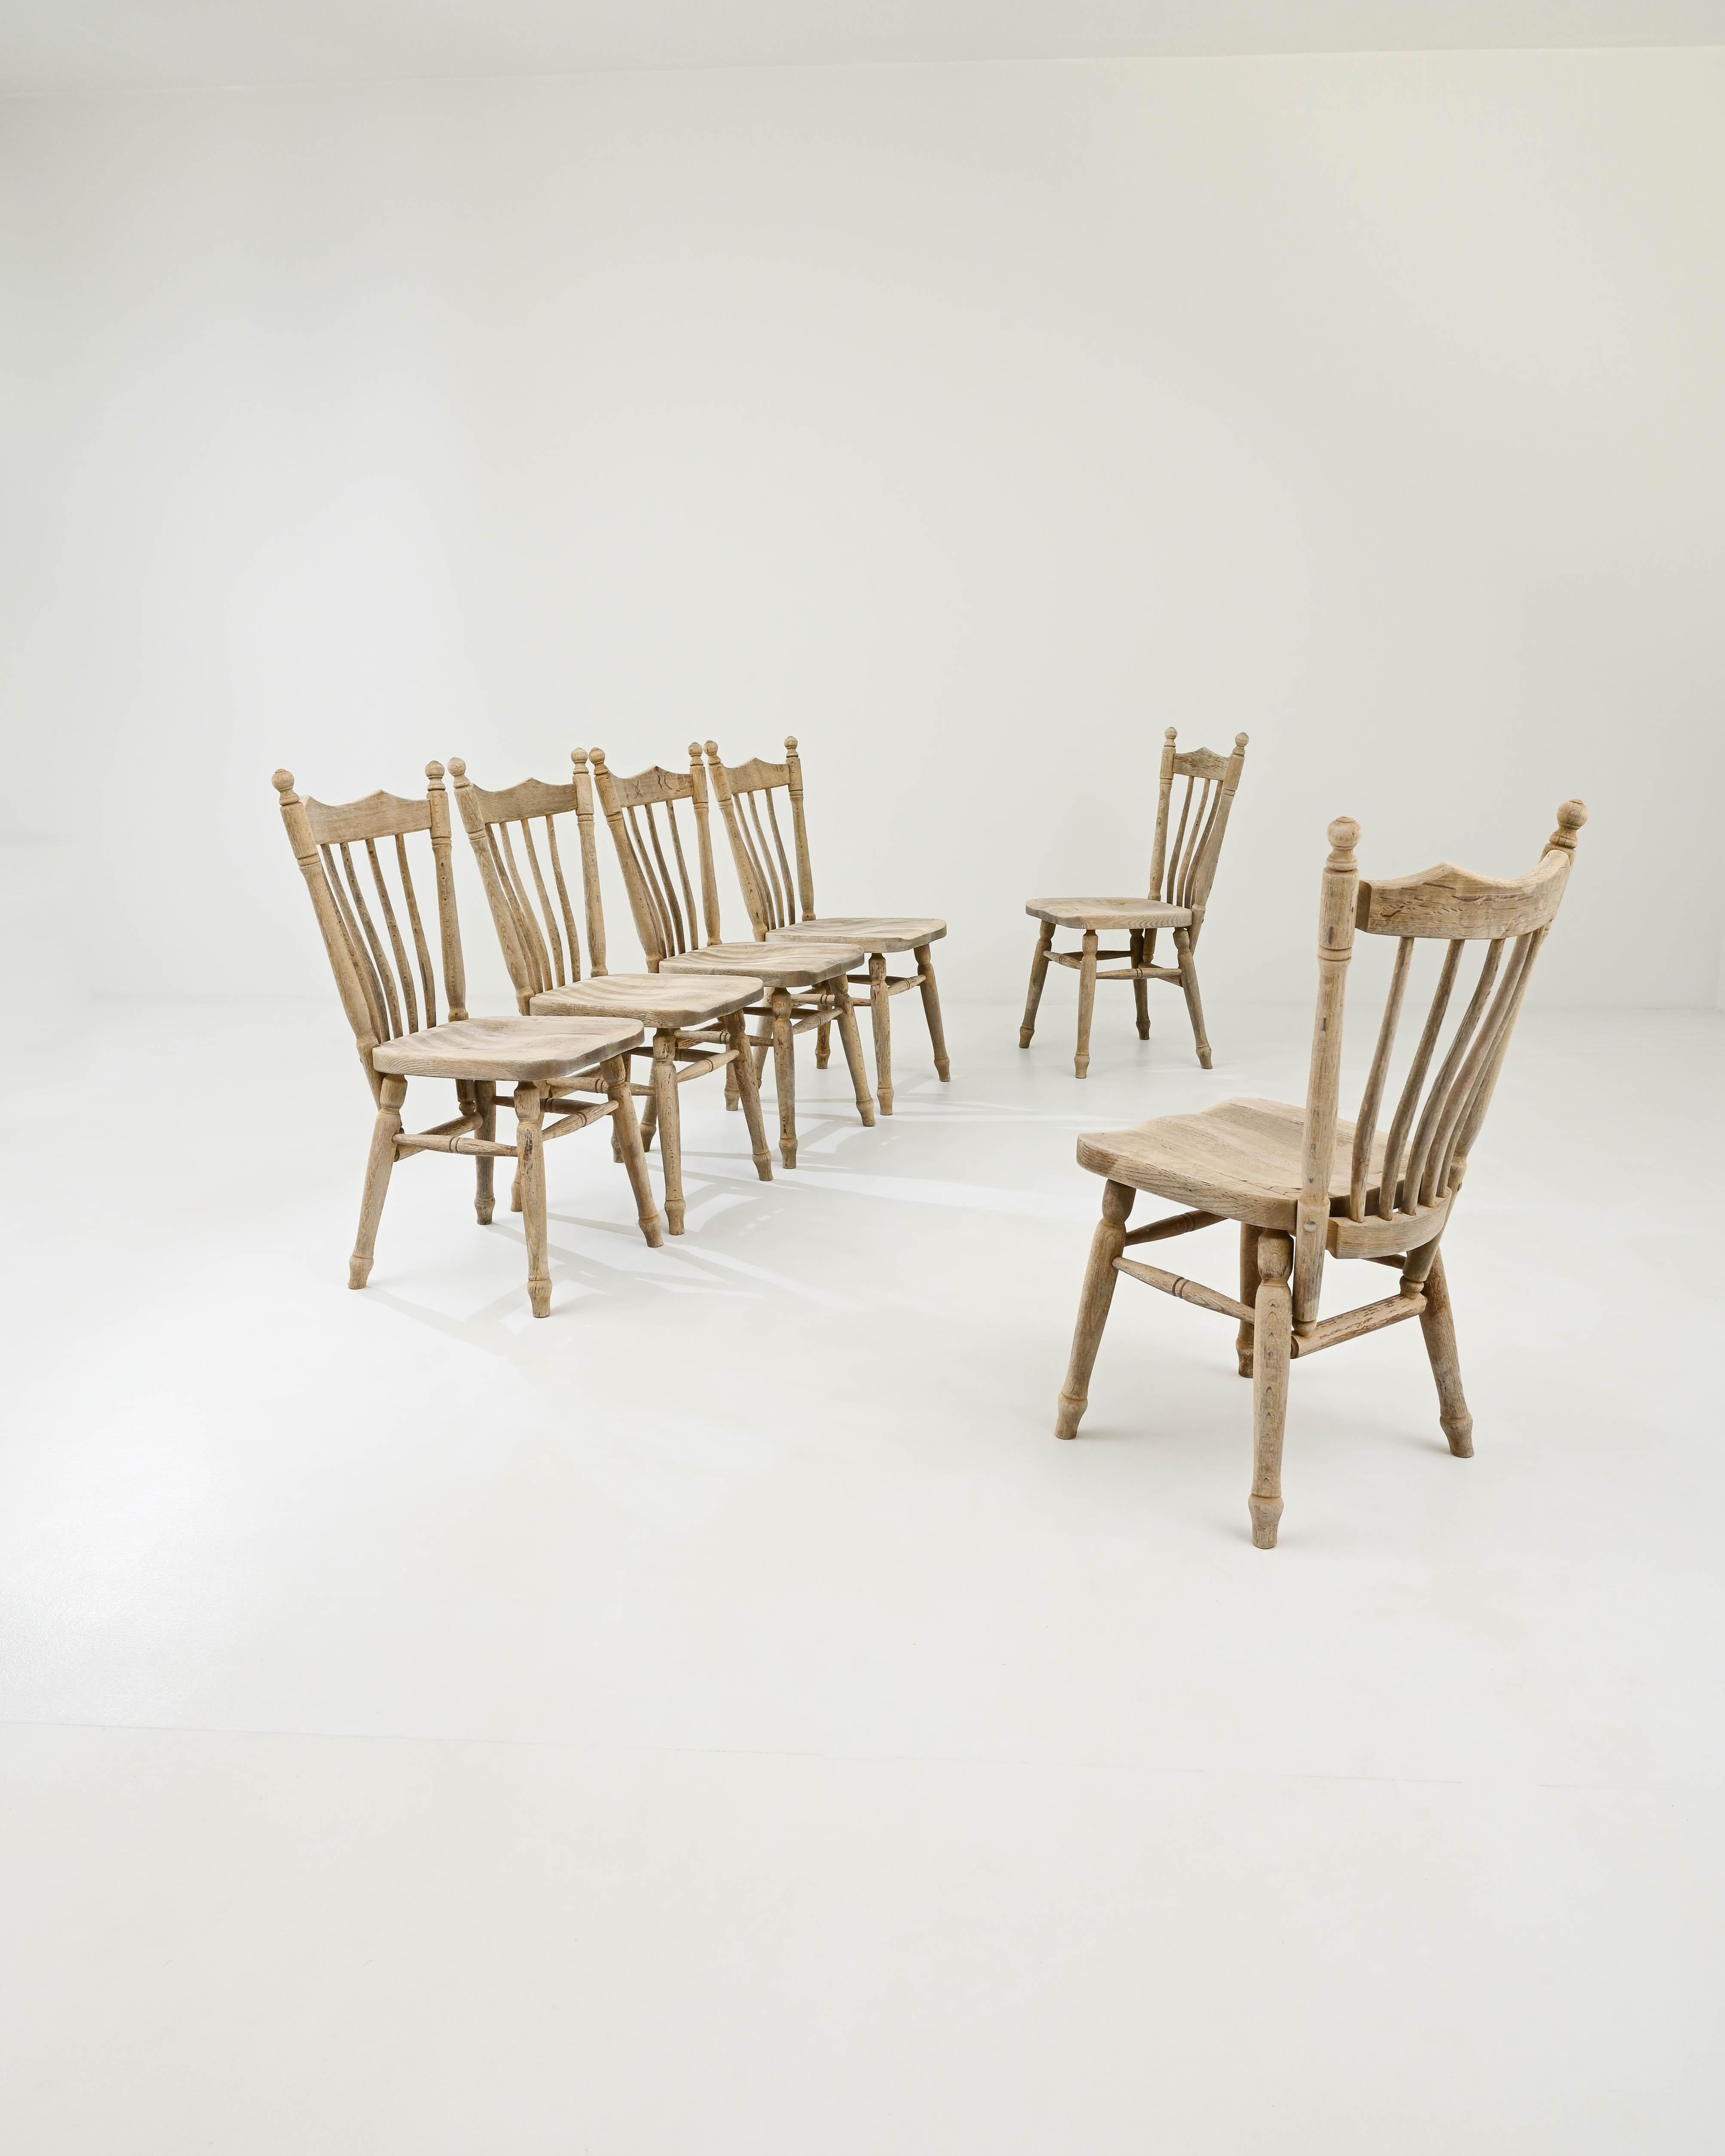 A set of wooden dining chairs created in 20th century Belgium. Created in a classic Belgian farmhouse style, these chairs exude a sense of dignity, while inviting one to sit with a palpable warmth. Gentle tapering back supports, thoughtfully lathed